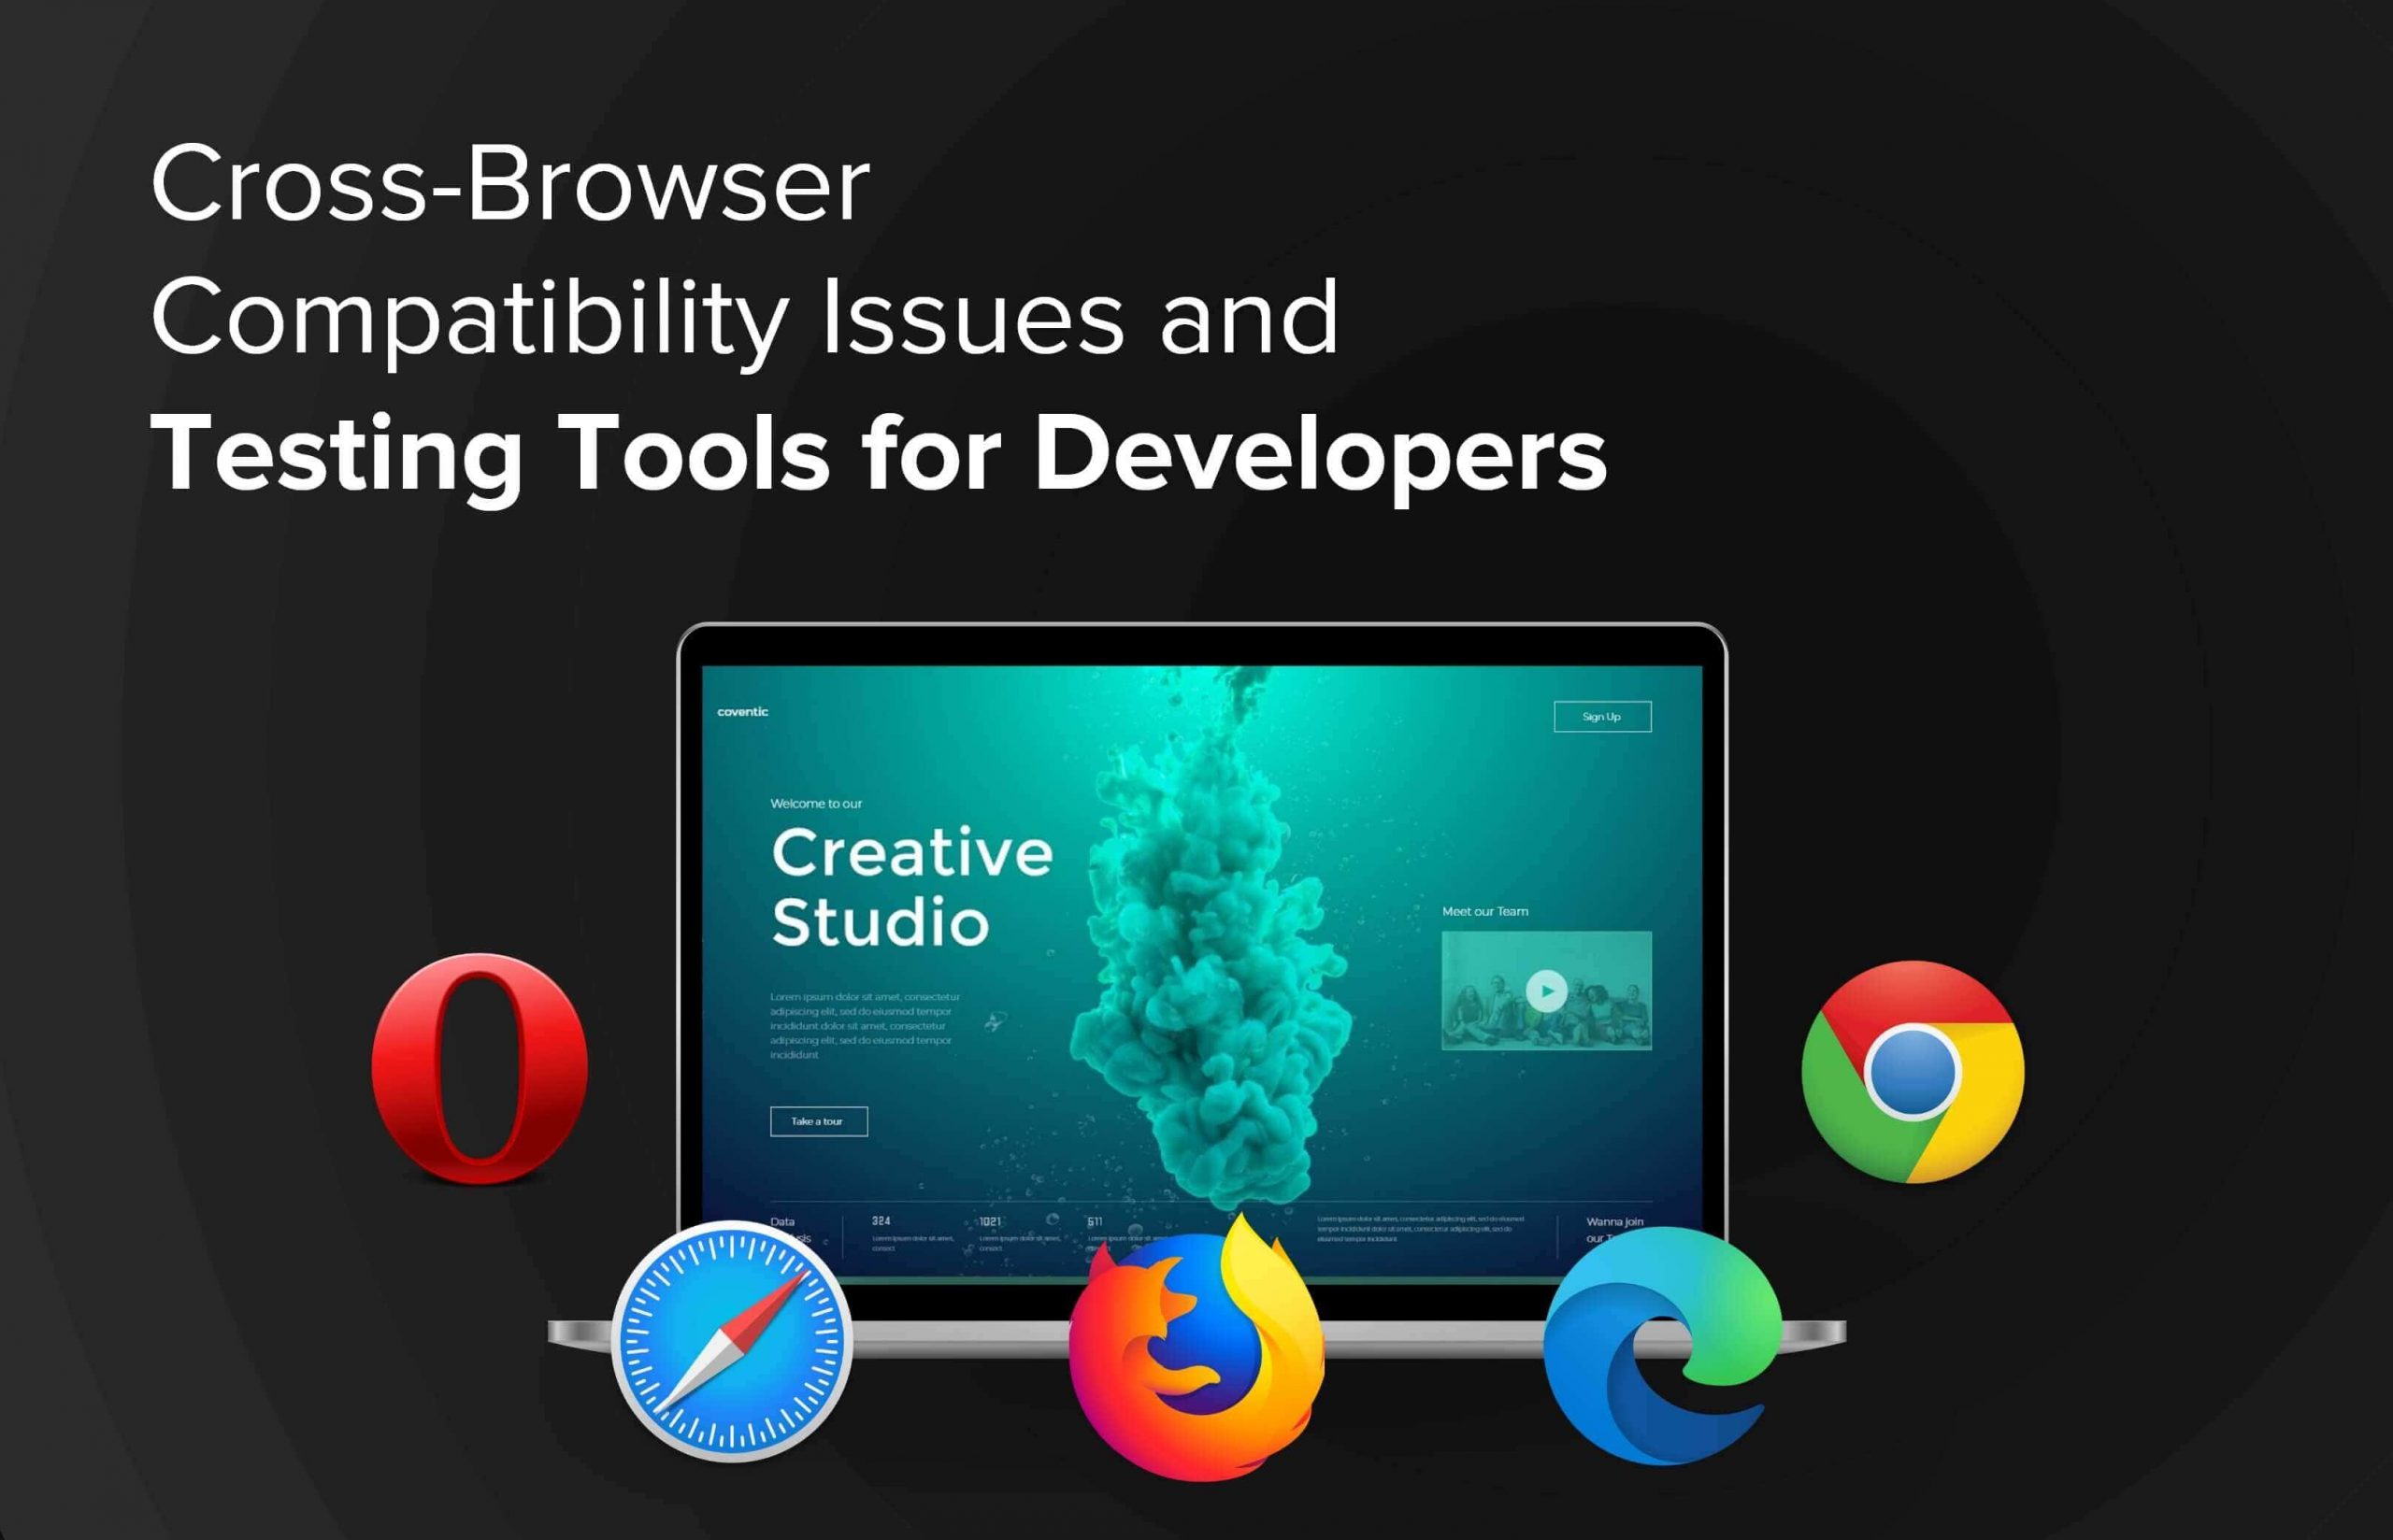 Top 10 Cross-Browser Compatibility Issues and Testing Tools for Developers